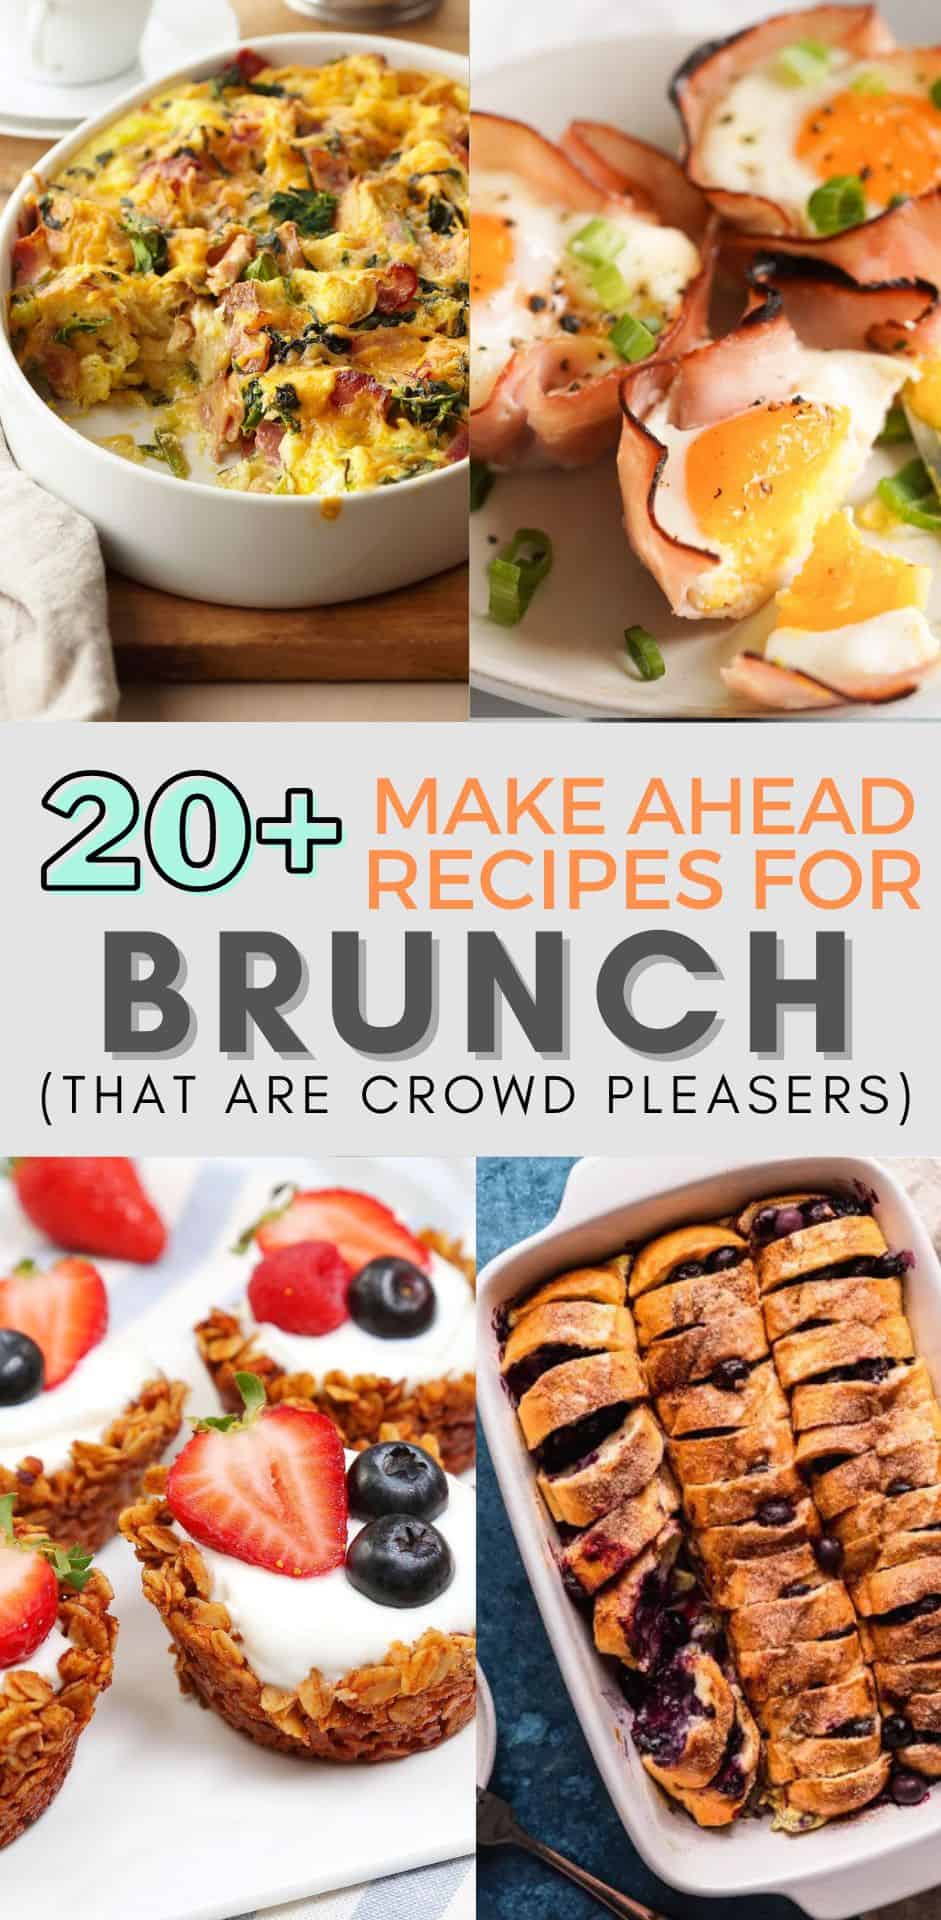 Brunch Recipes To Make Ahead